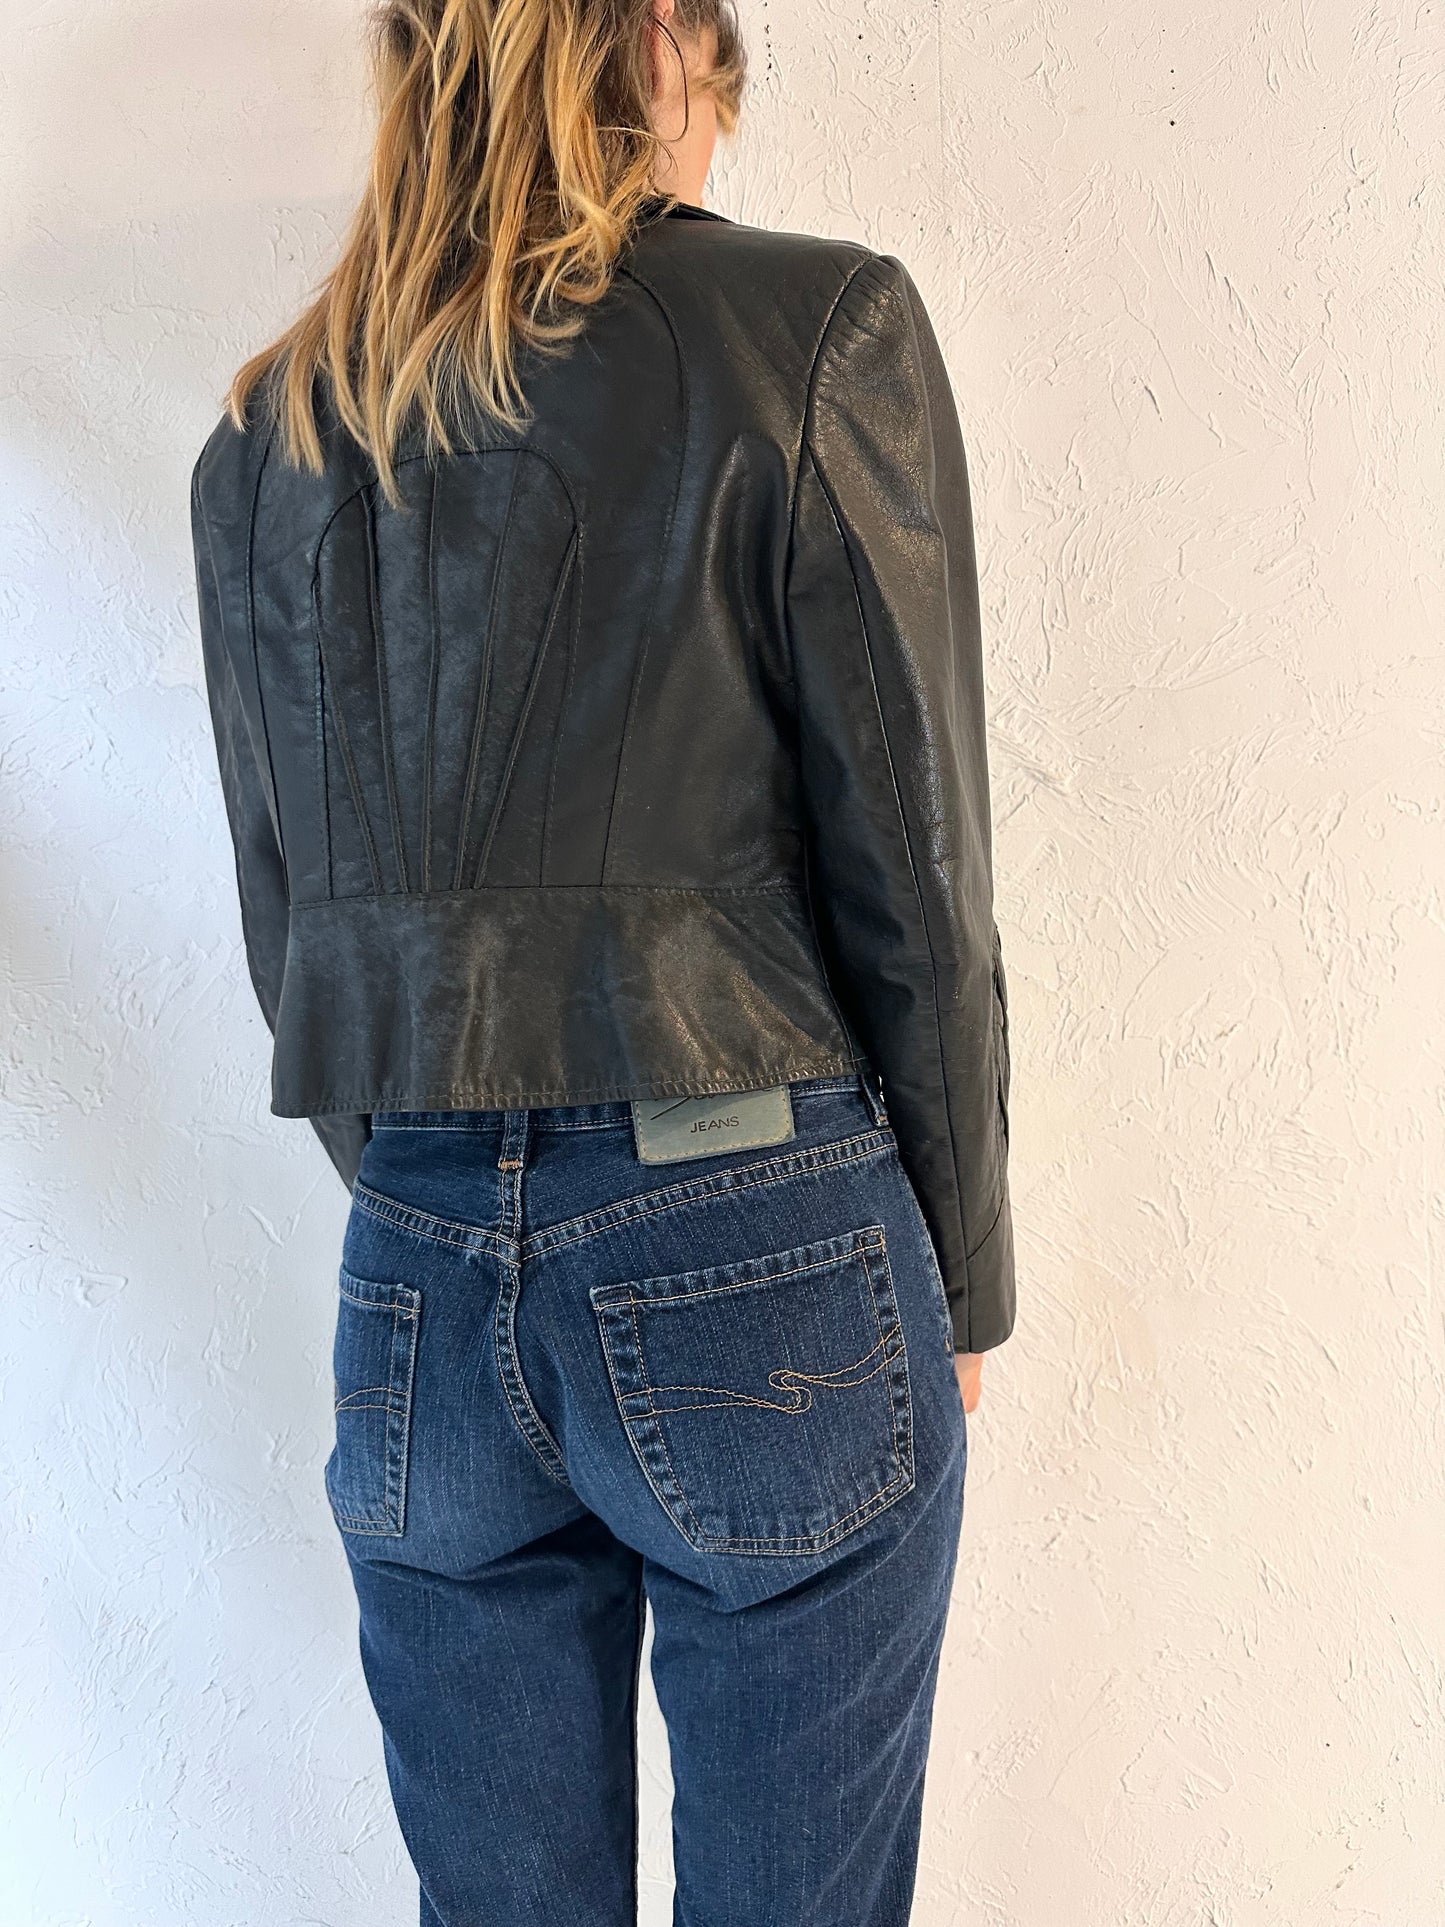 90s 'Leather Ranch' Black Leather Jacket / Small